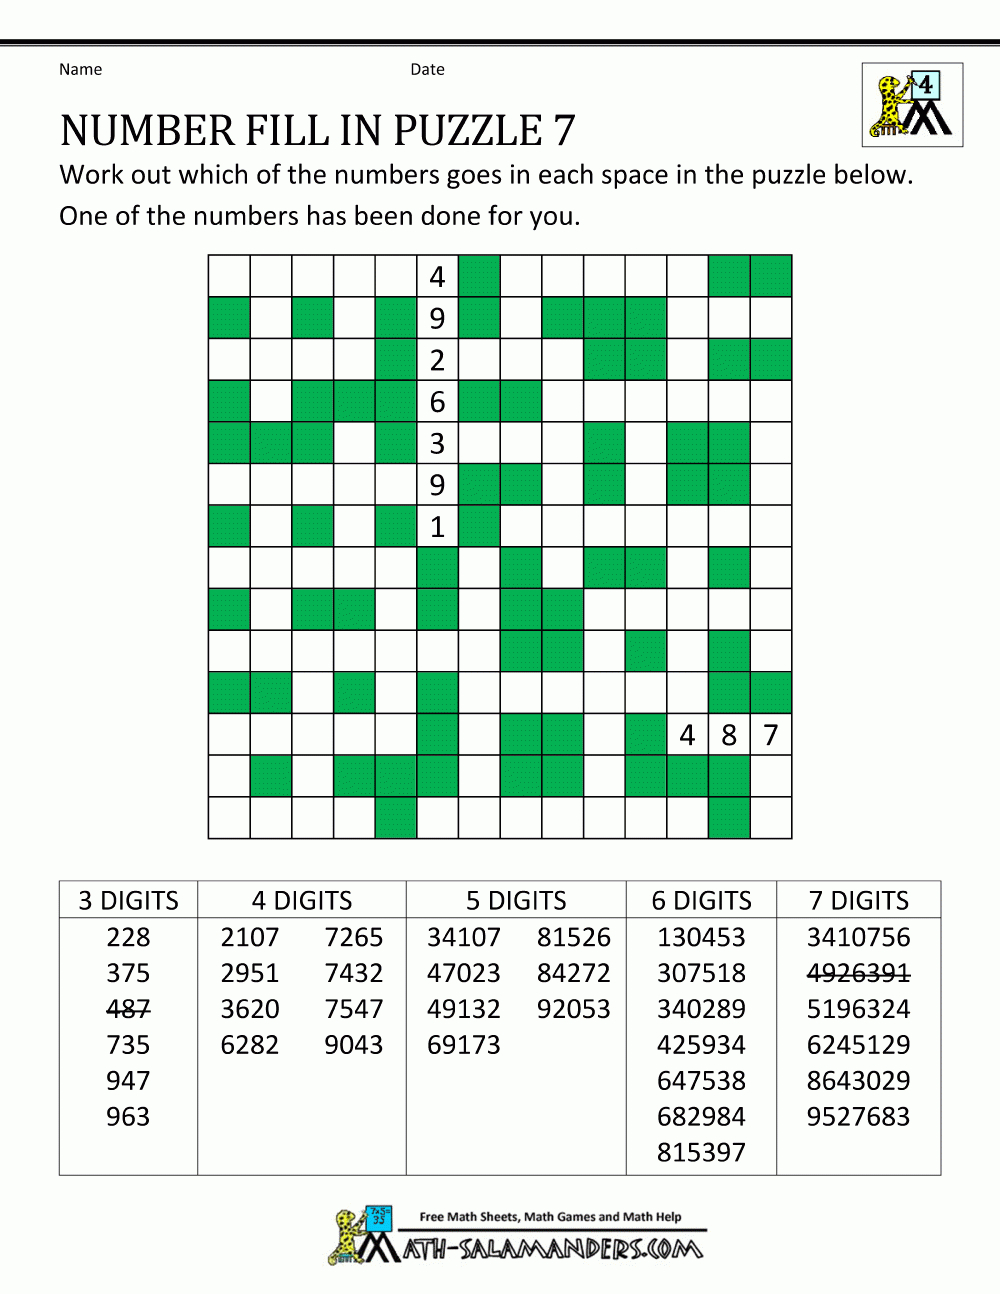 Number Fill In Puzzles - Free Printable Crossword Puzzle #1 Answers